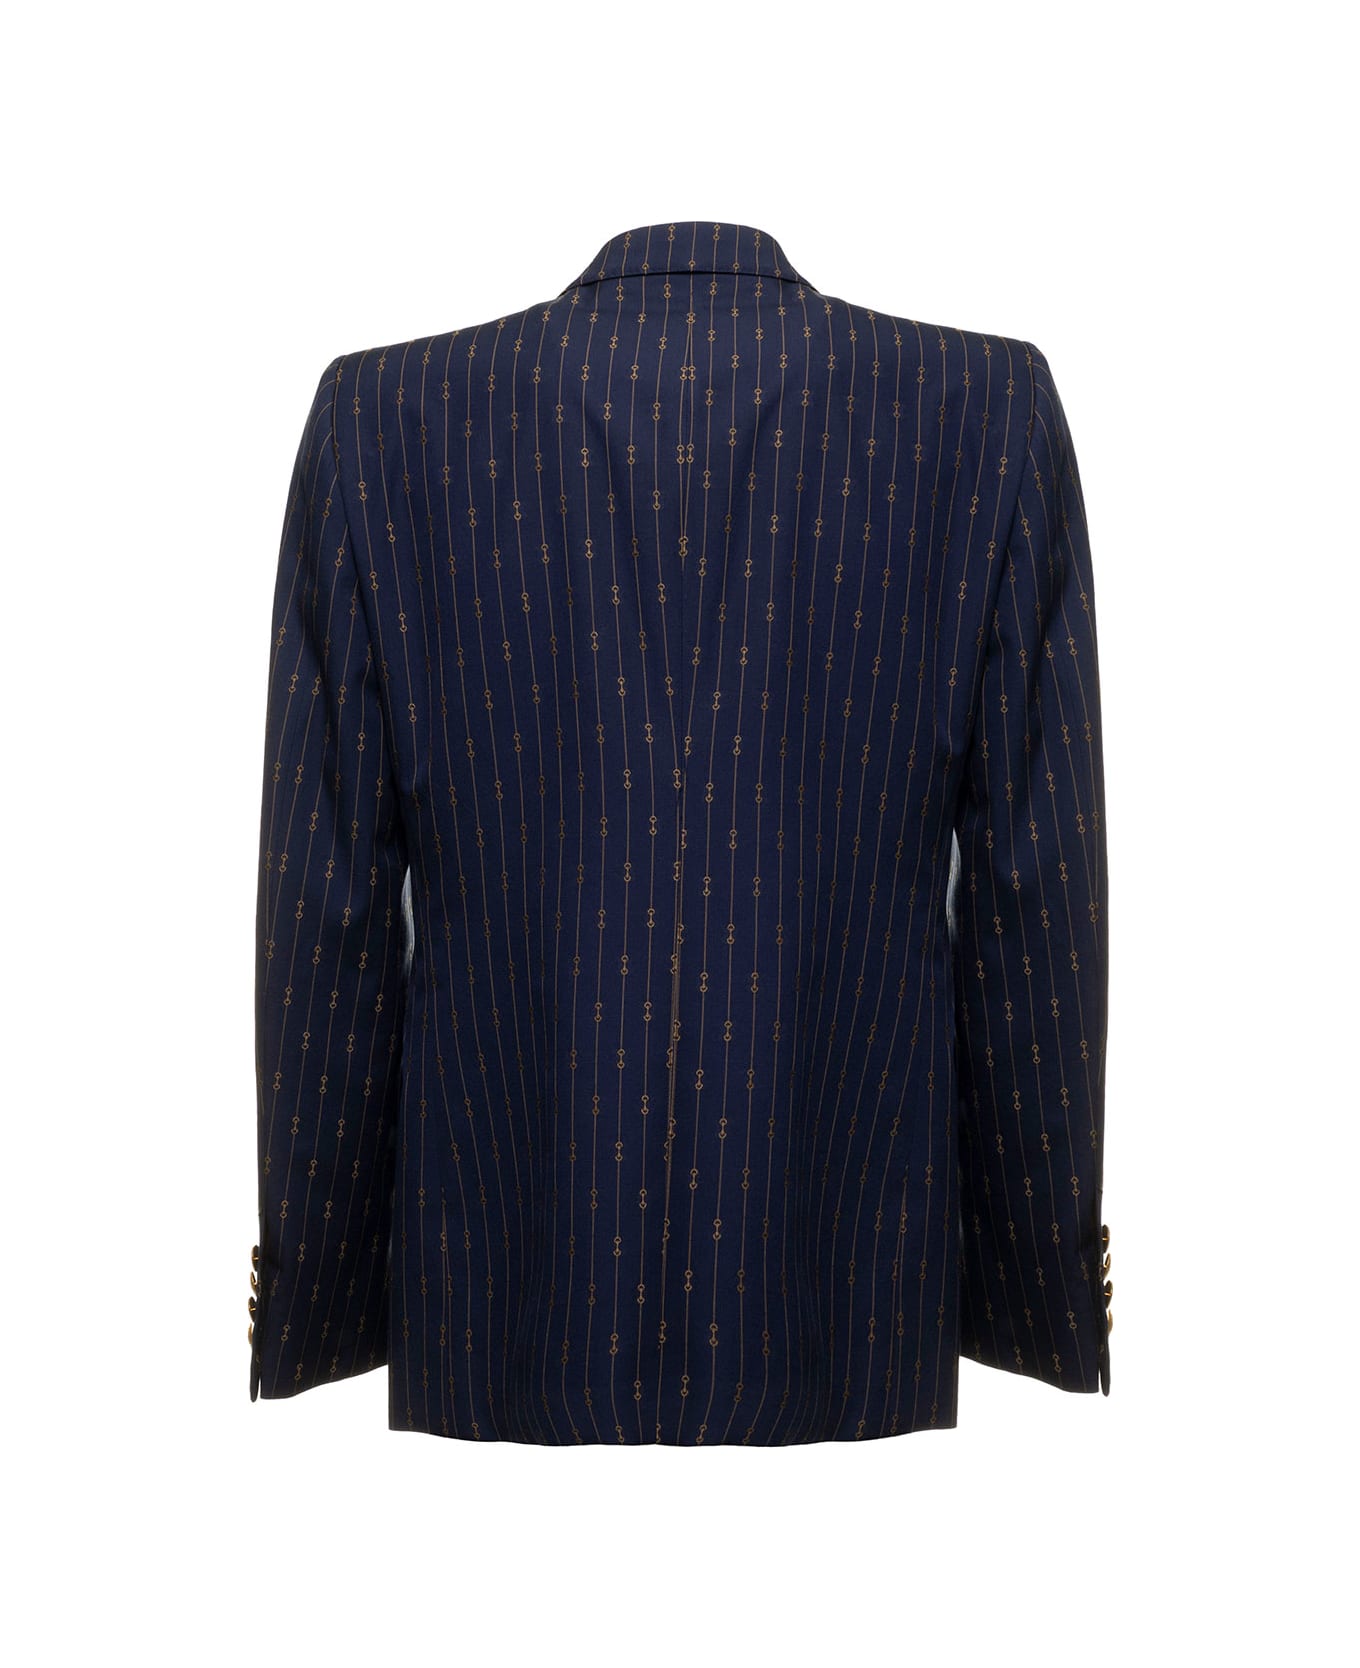 Gucci Man's Blue Printed Wool Double-breasted Blazer - blue